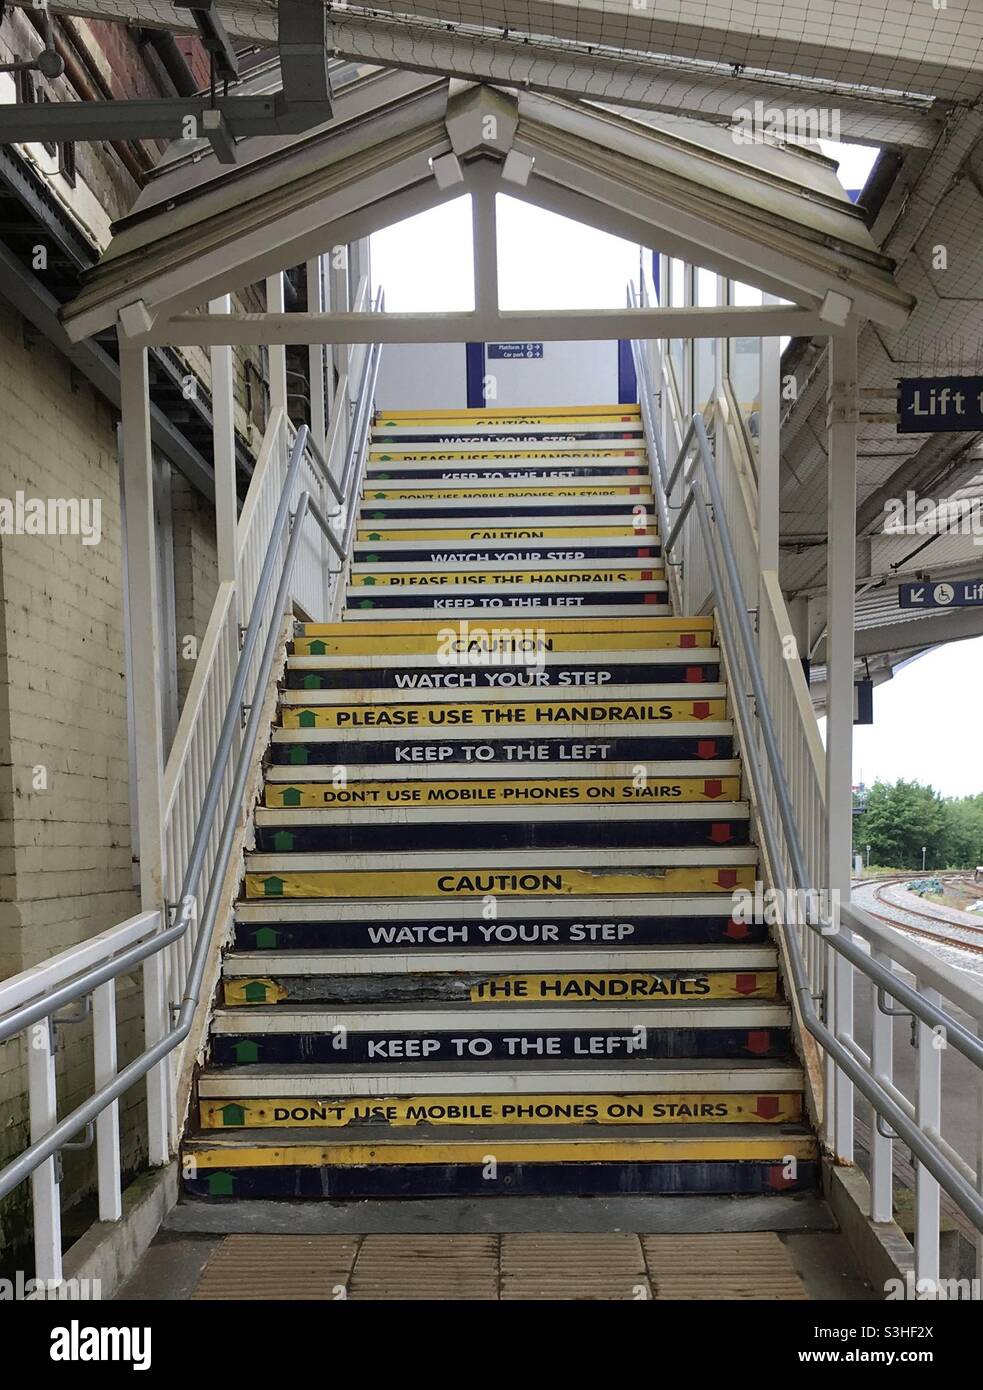 Wooden stairs to the footbridge over railway lines at Harrogate Rail Station, North Yorkshire, UK.Opened in 1862, this was largely rebuilt in 1964-5.Trains go to Leeds, London, York and elsewhere. Stock Photo